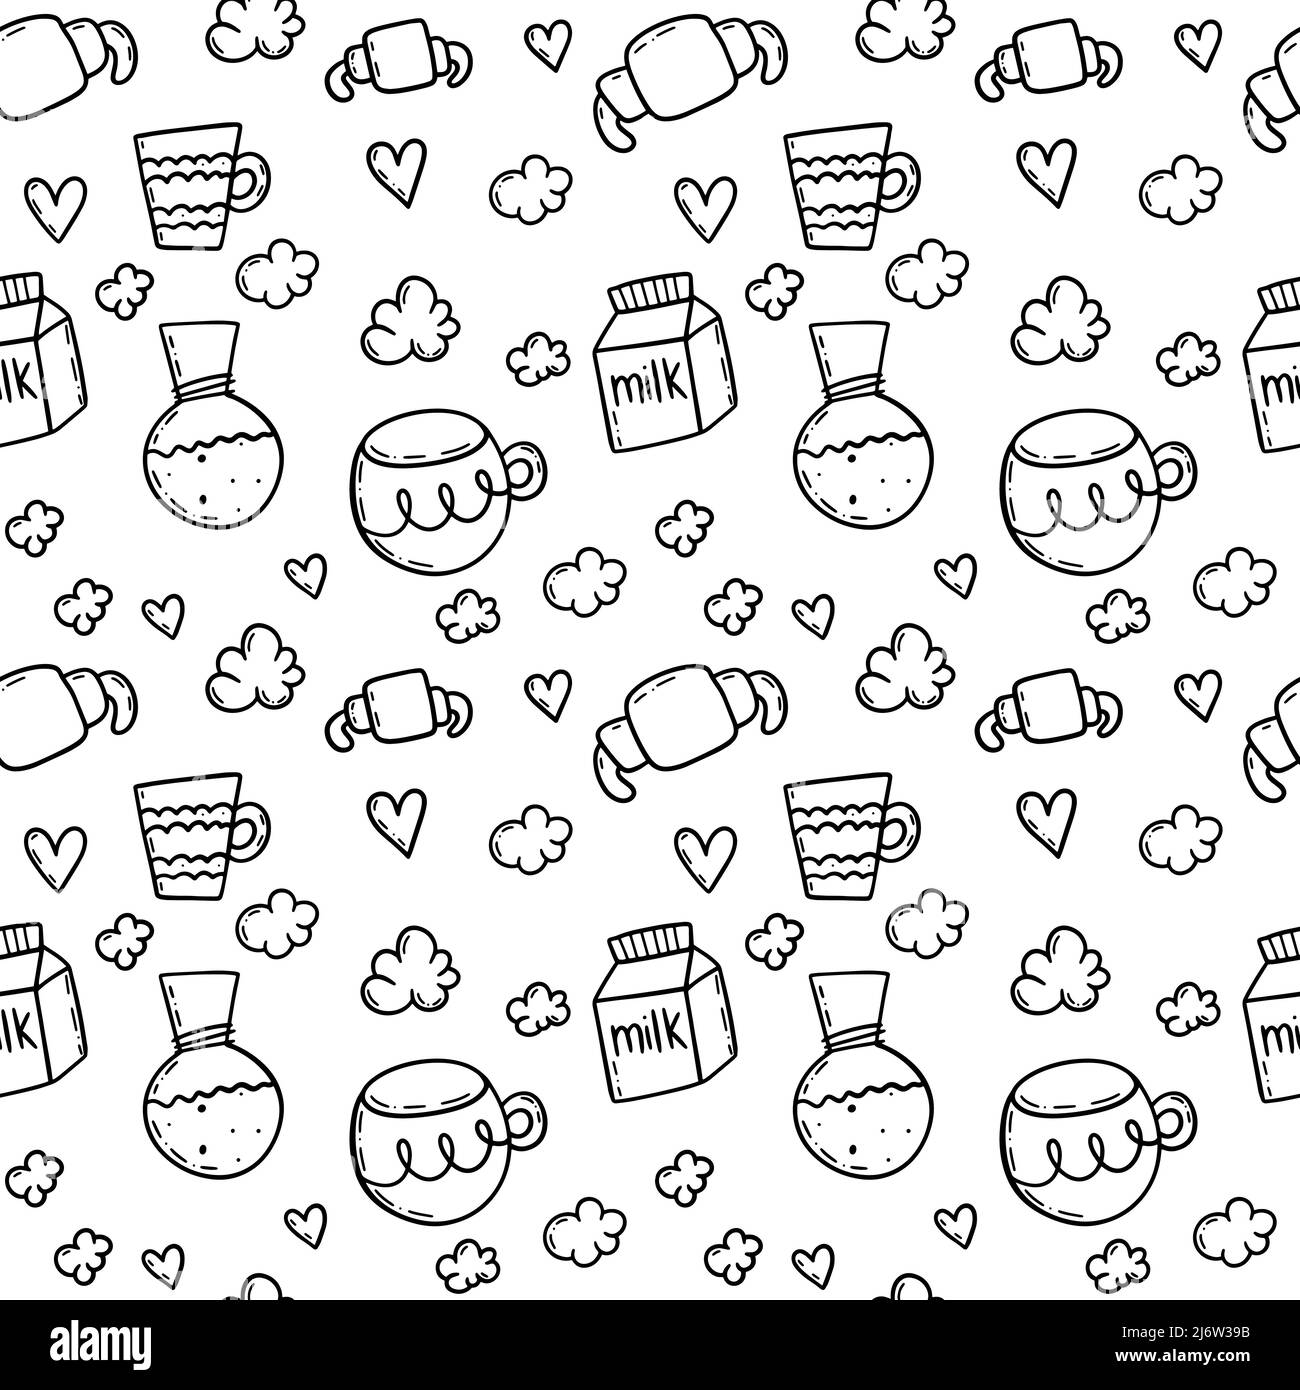 Coffee utensils black ink outline in doodle style seamless pattern. Stock Vector